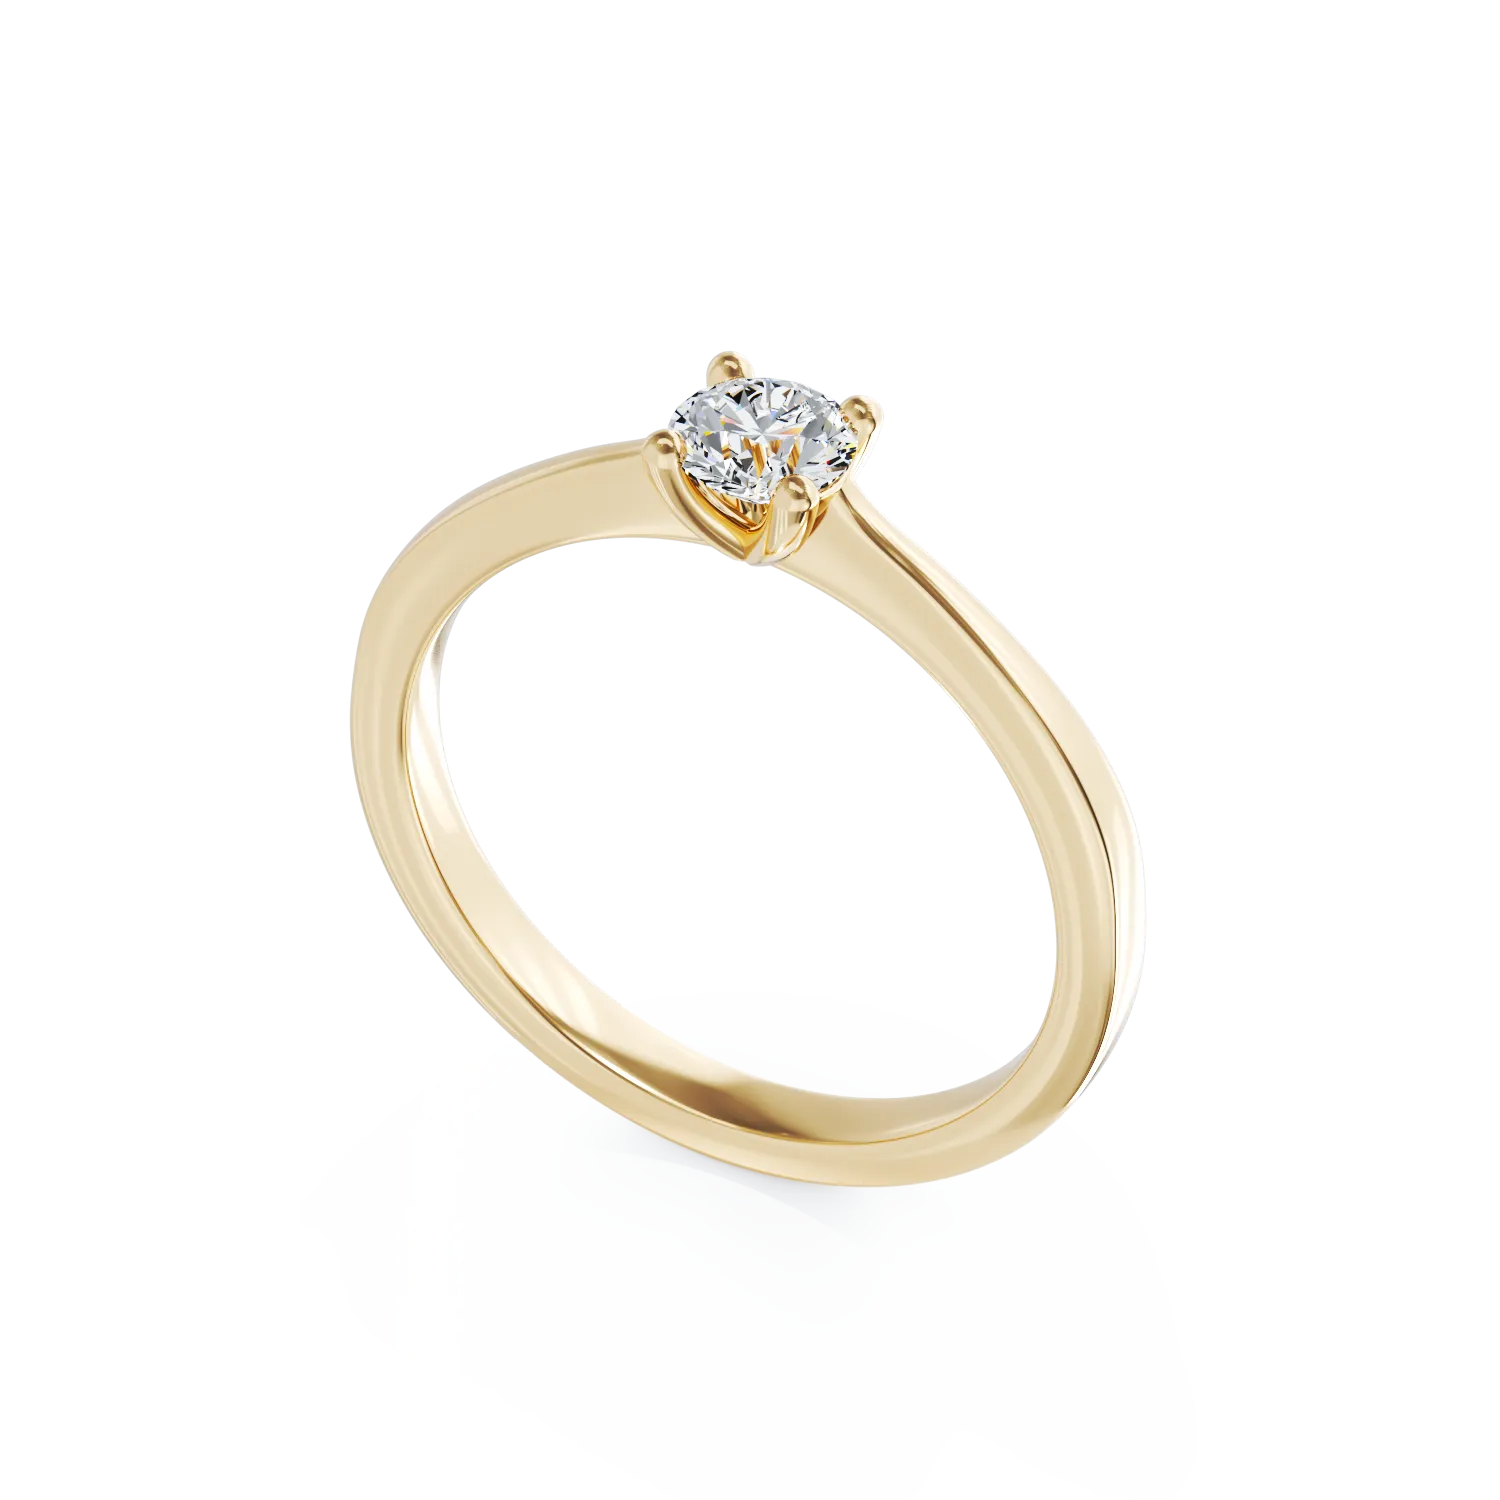 18K yellow gold engagement ring with 0.315ct diamond